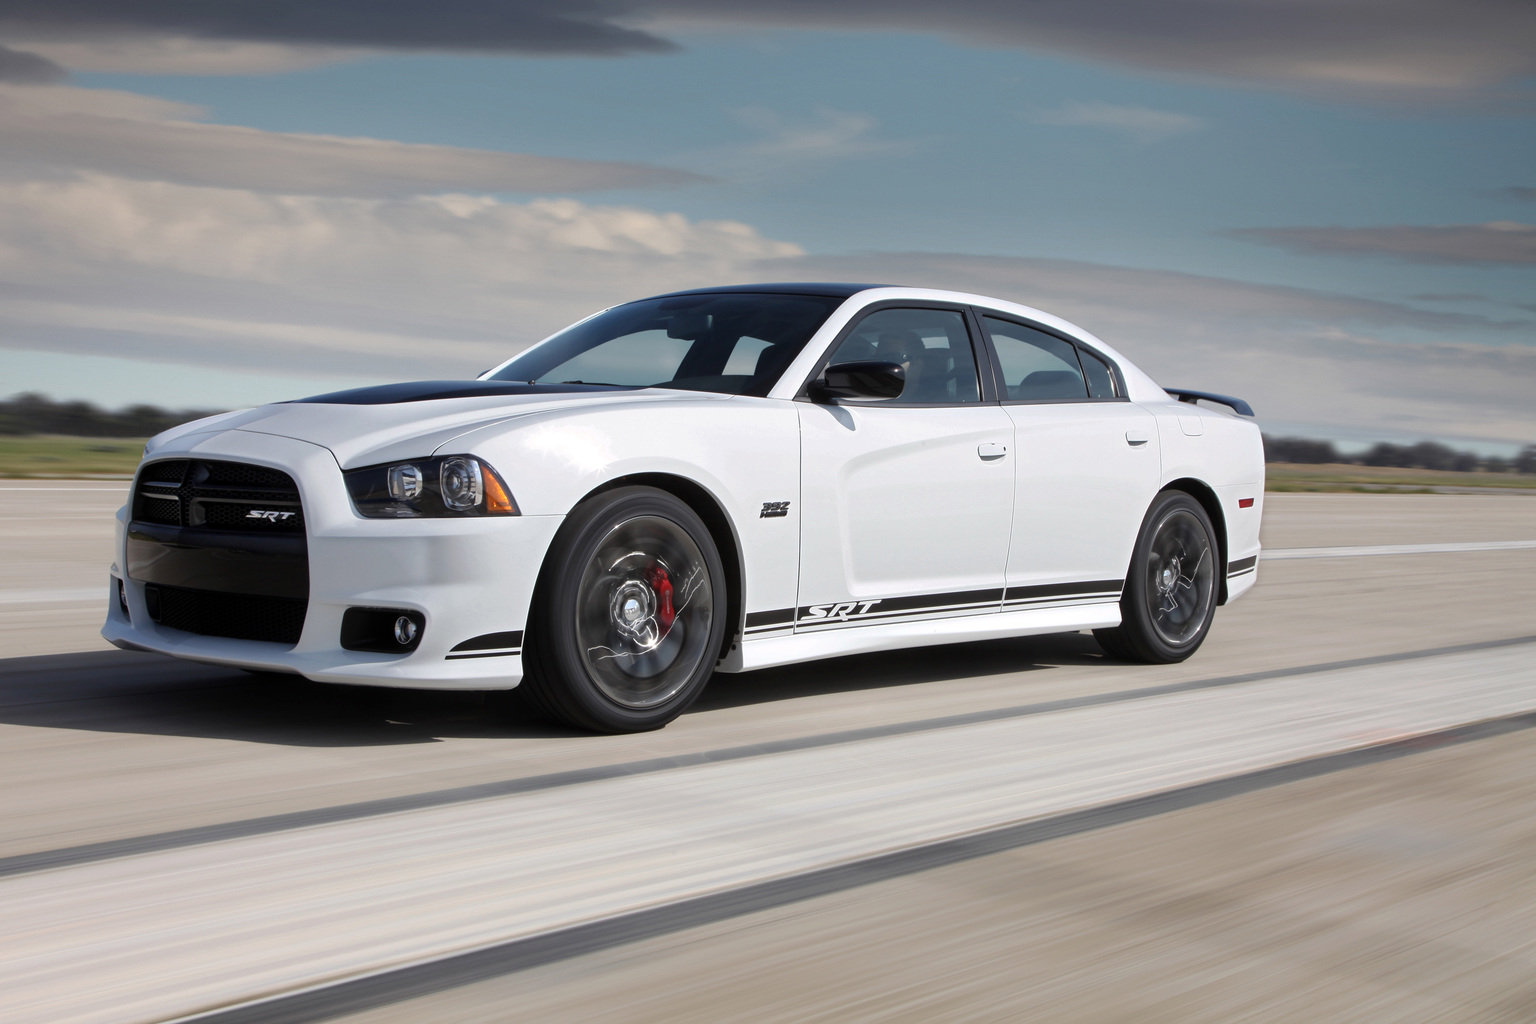 2013 Dodge Charger SRT8 392 Appearance Package